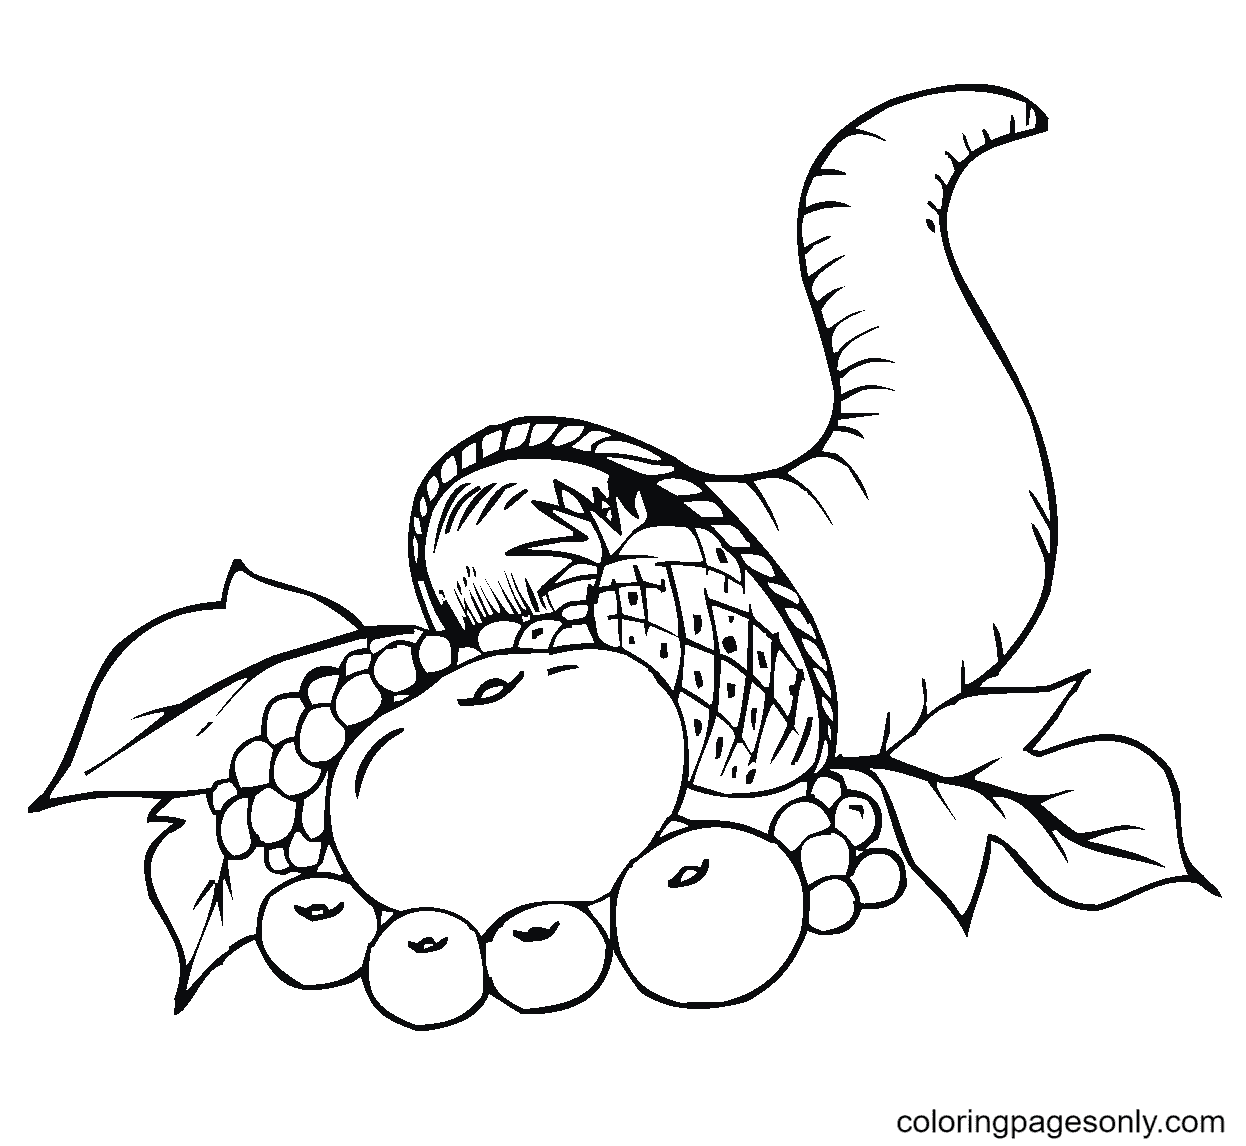 Horn of Amalthea Coloring Page